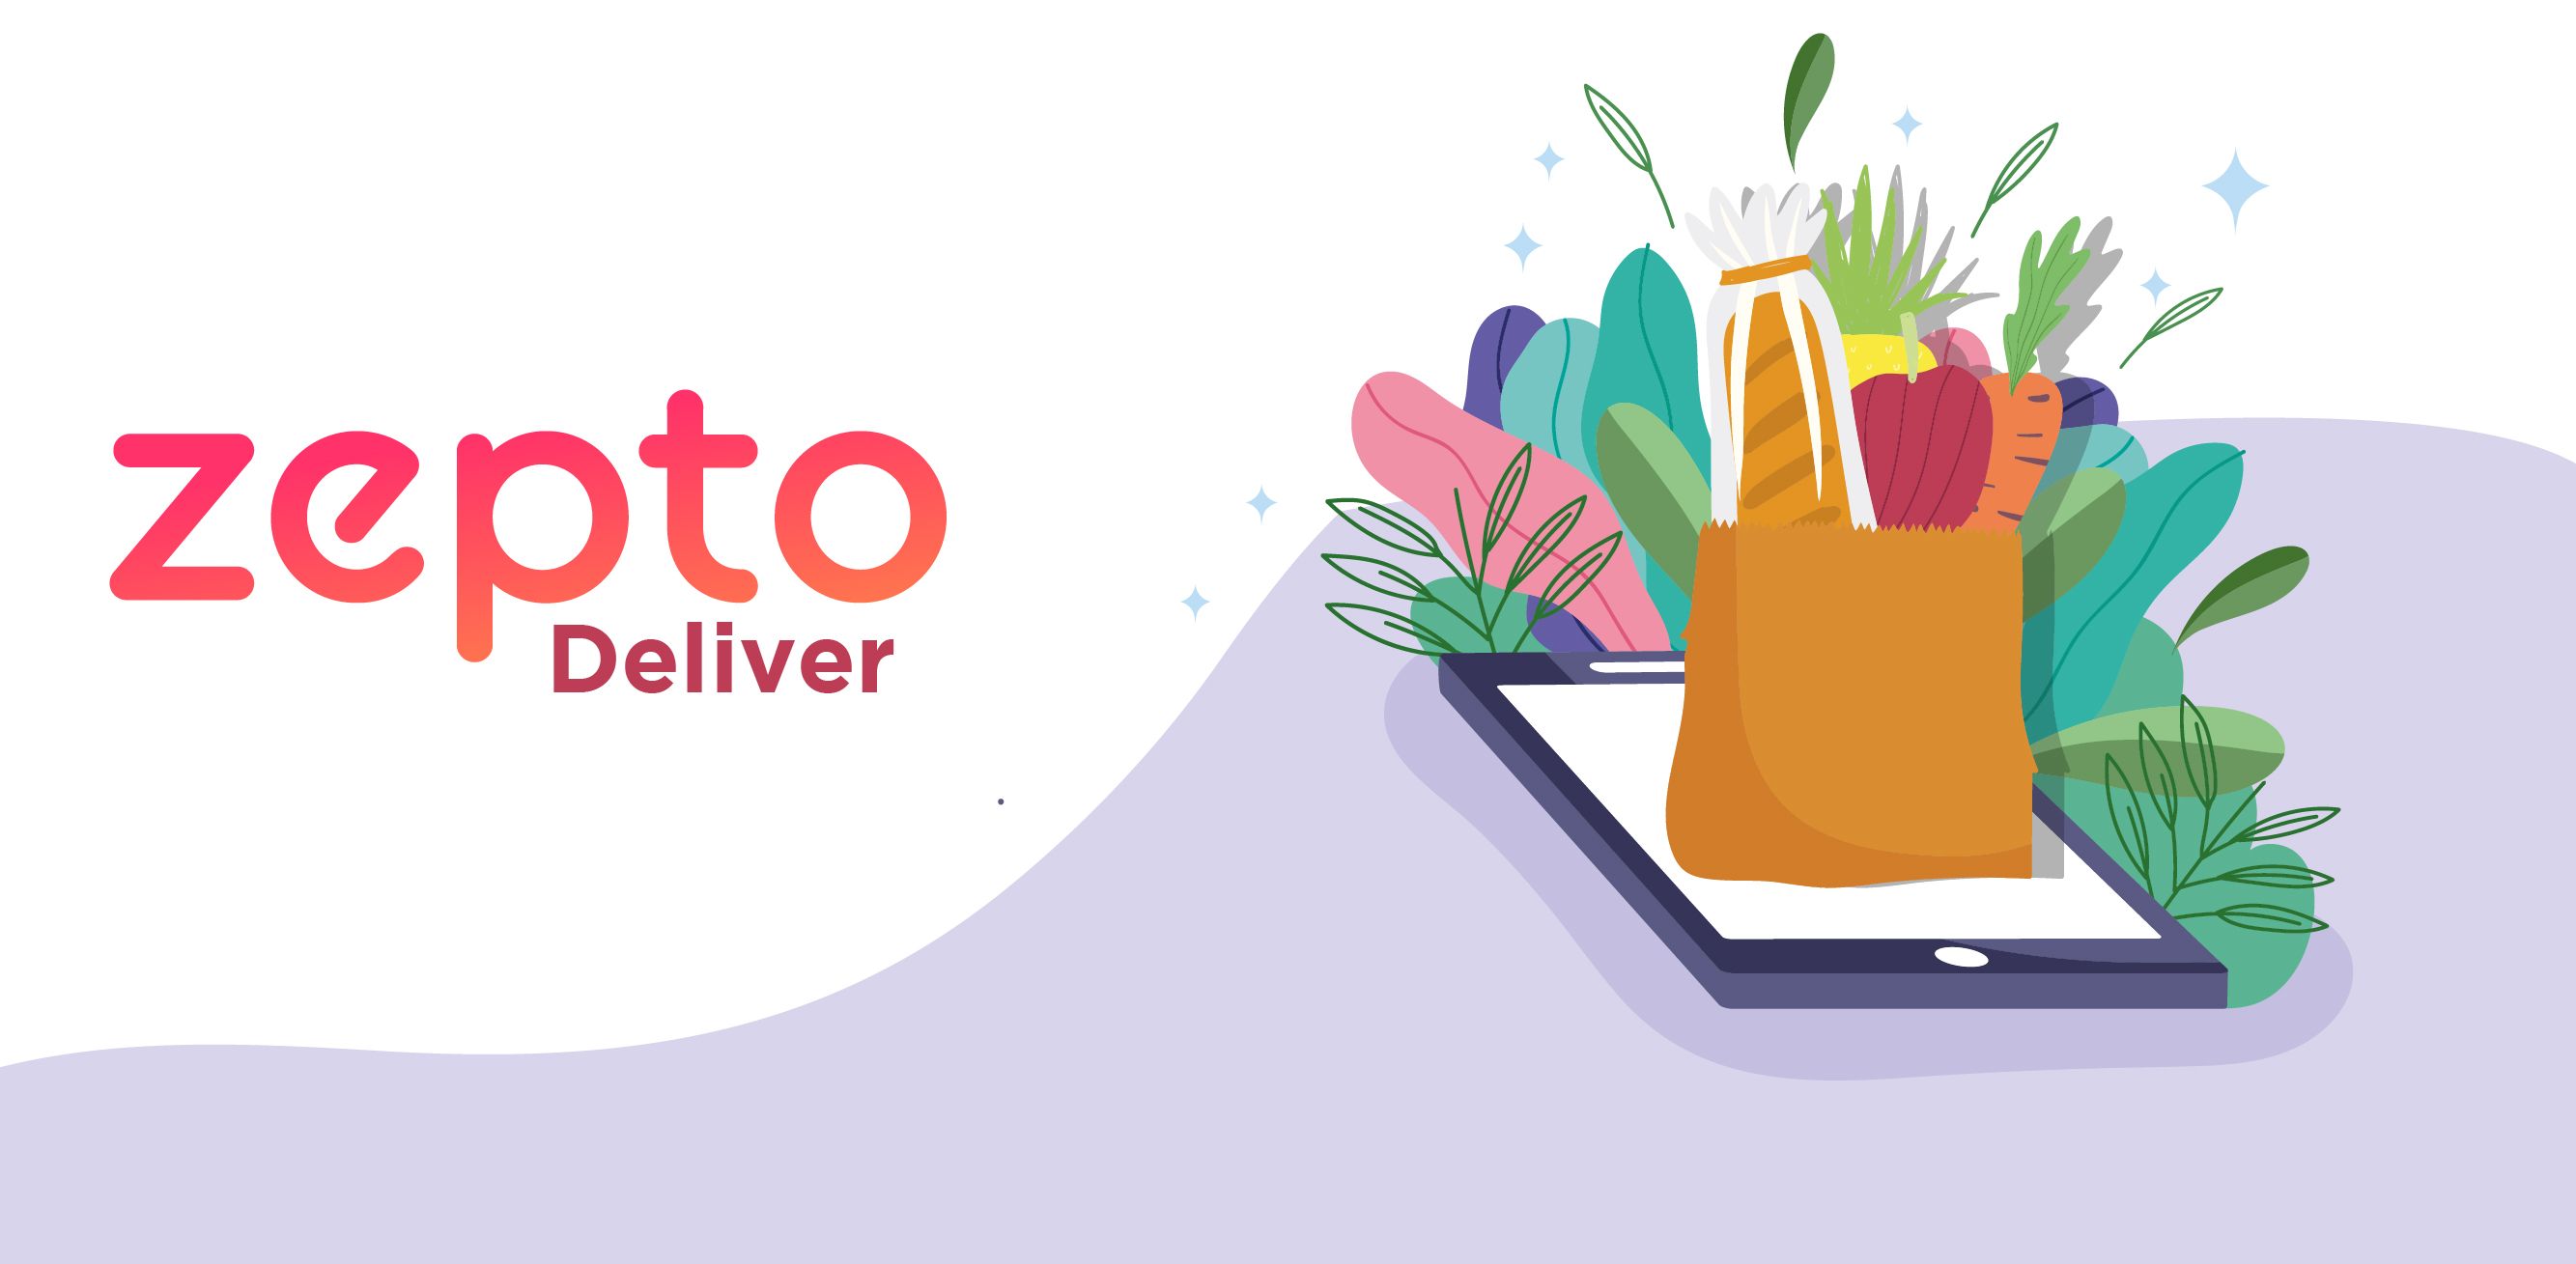 What is Zepto delivery?